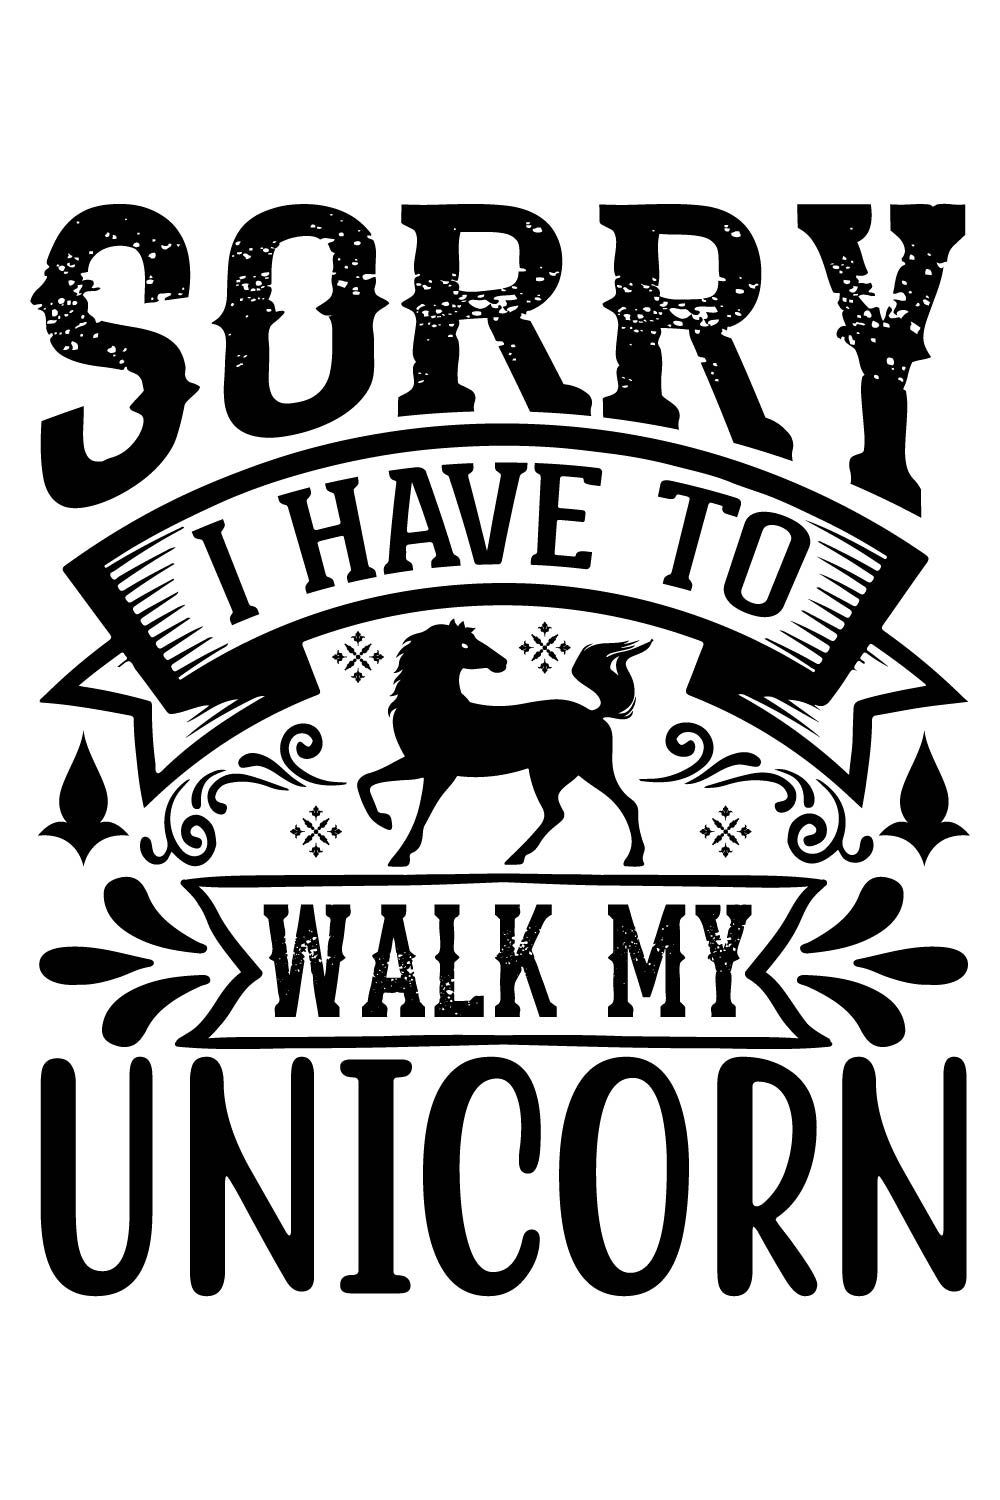 An image with an irresistible inscription for prints Sorry i have to walk my unicorn.